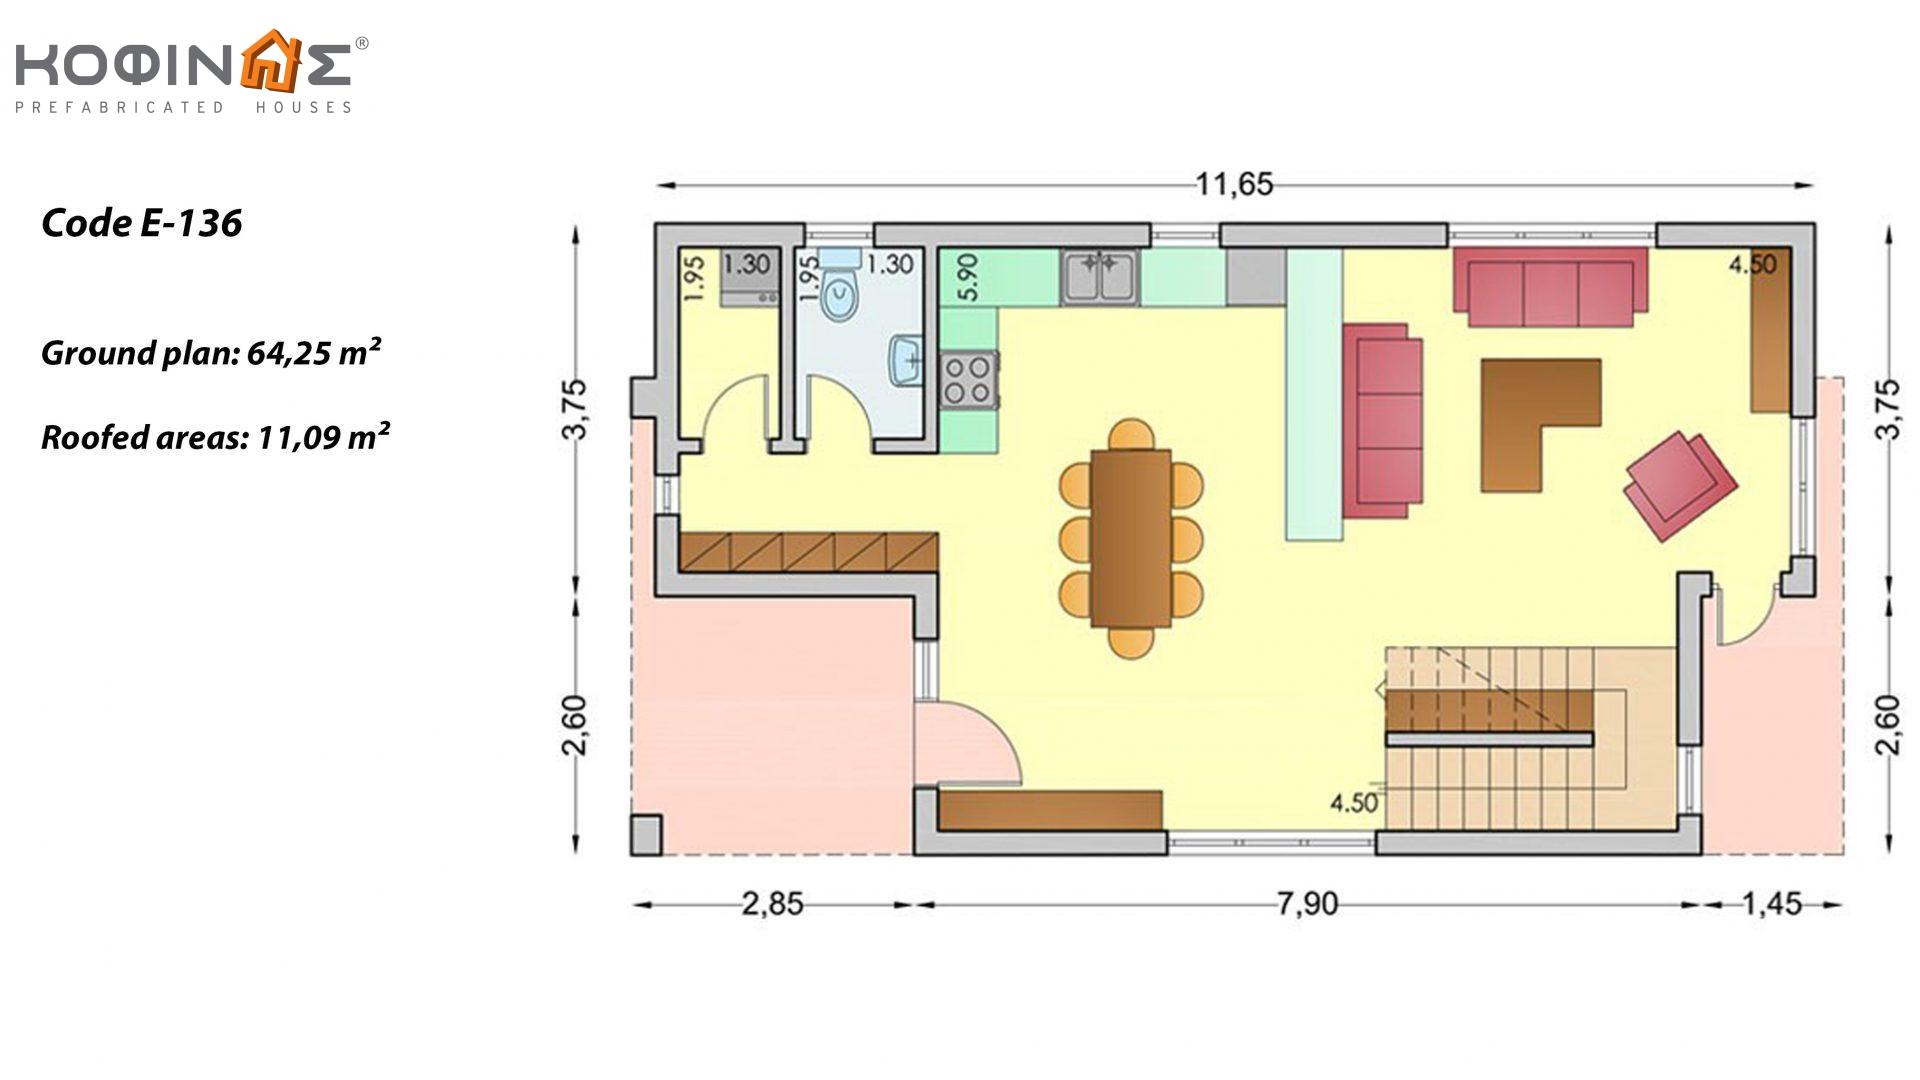 Home Complex E-136, total surface of 3 x 136,39 = 409,17 m²,covered areas 14,8 m²